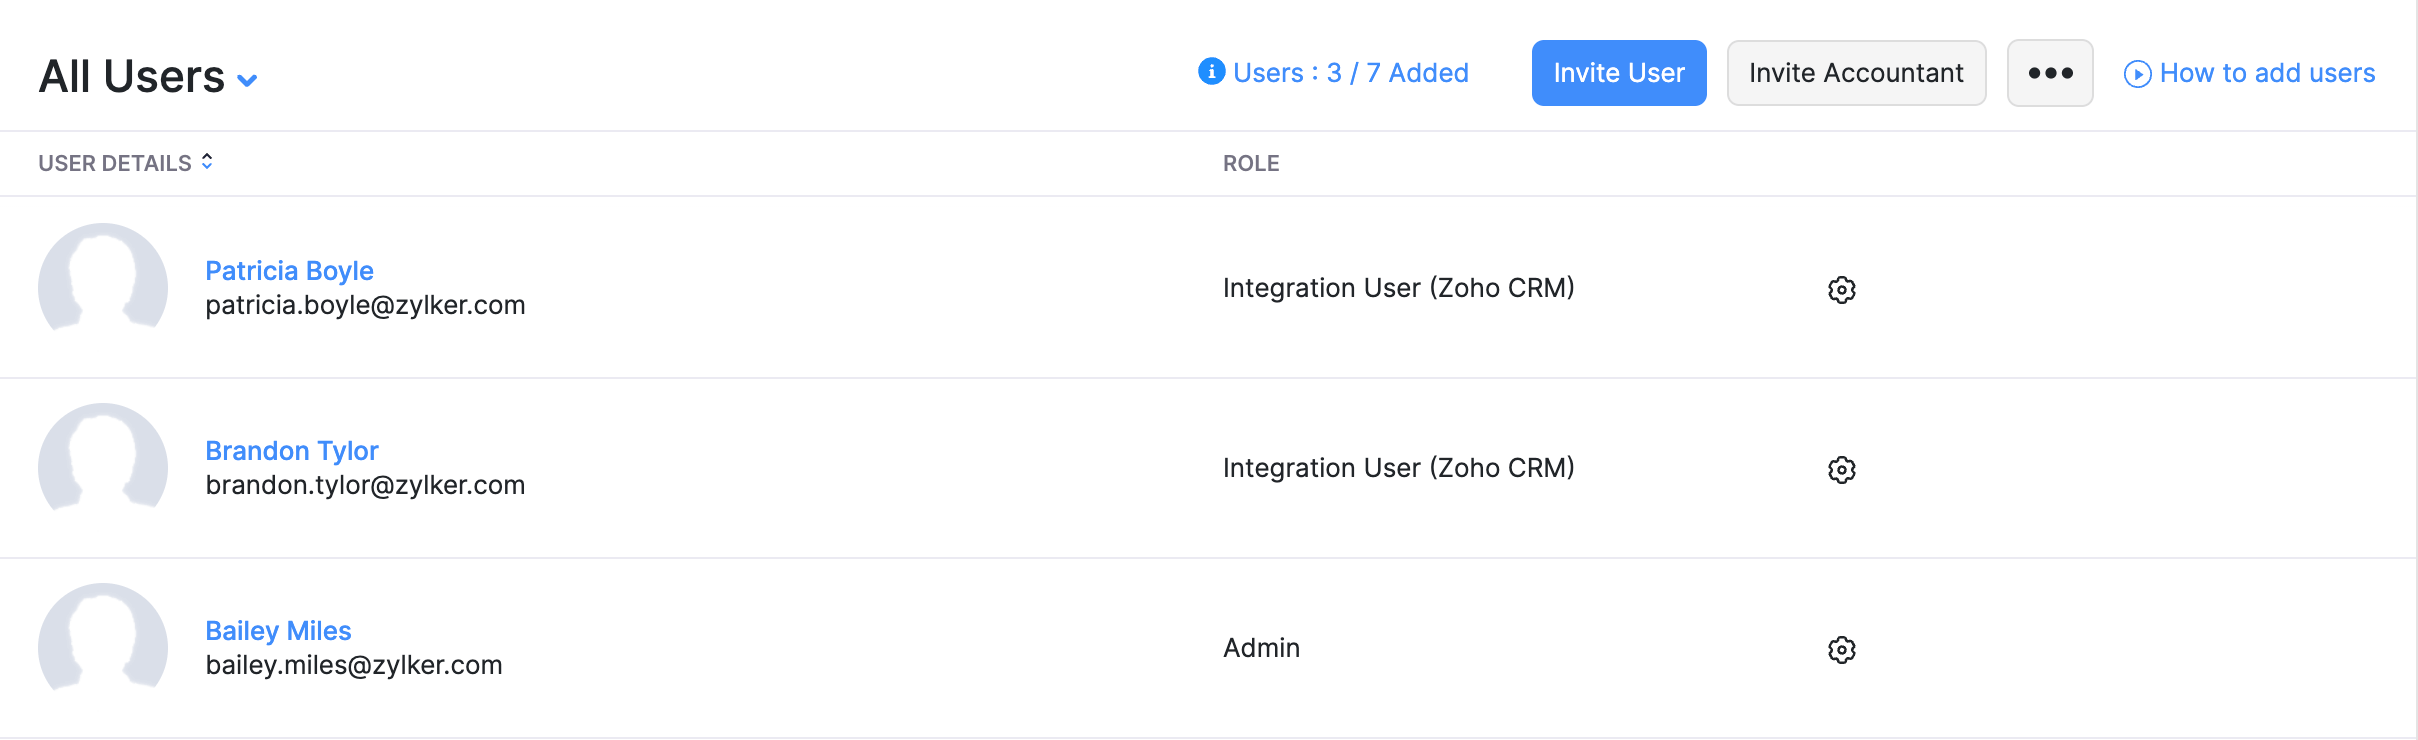 Users of the role Integration User (Zoho CRM)